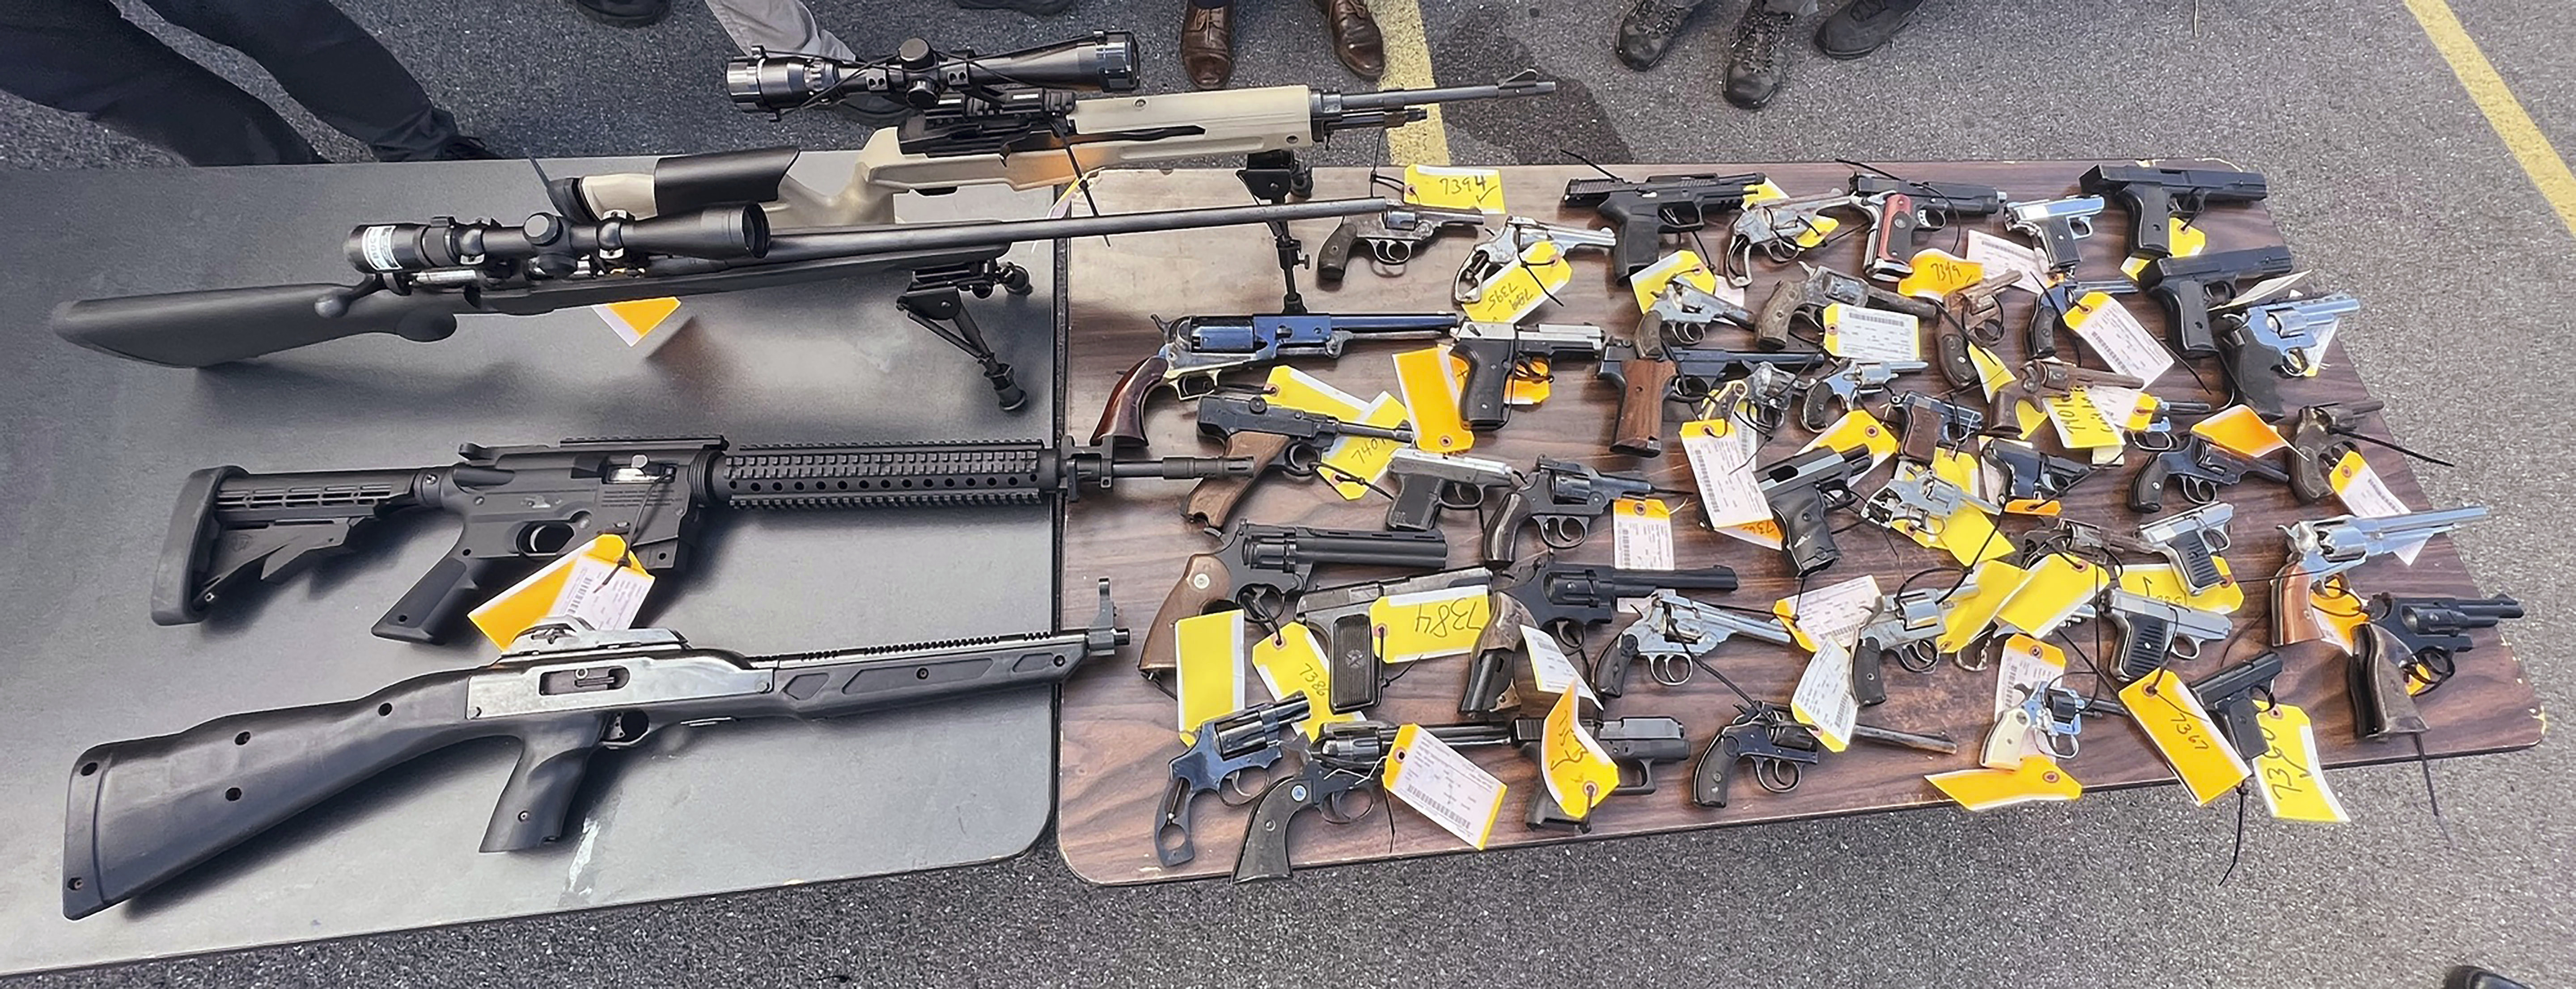 Gun Buy Back Recovers an Illegal Arsenal of Weapons - Harlem - New York -  DNAinfo